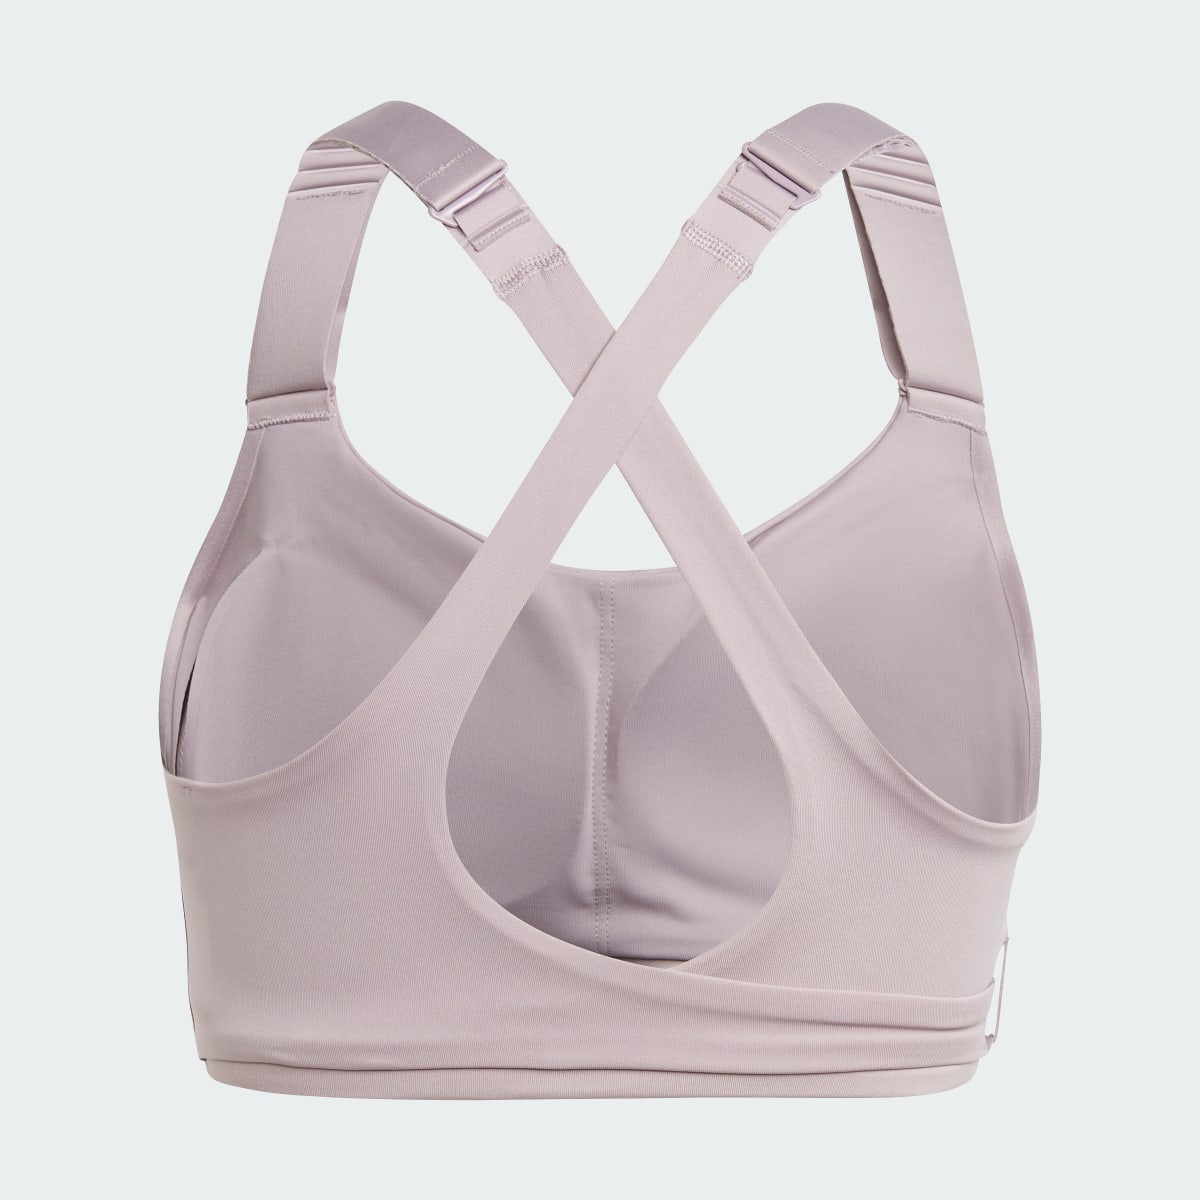 Adidas Brassière FastImpact Luxe Run Maintien fort. 6